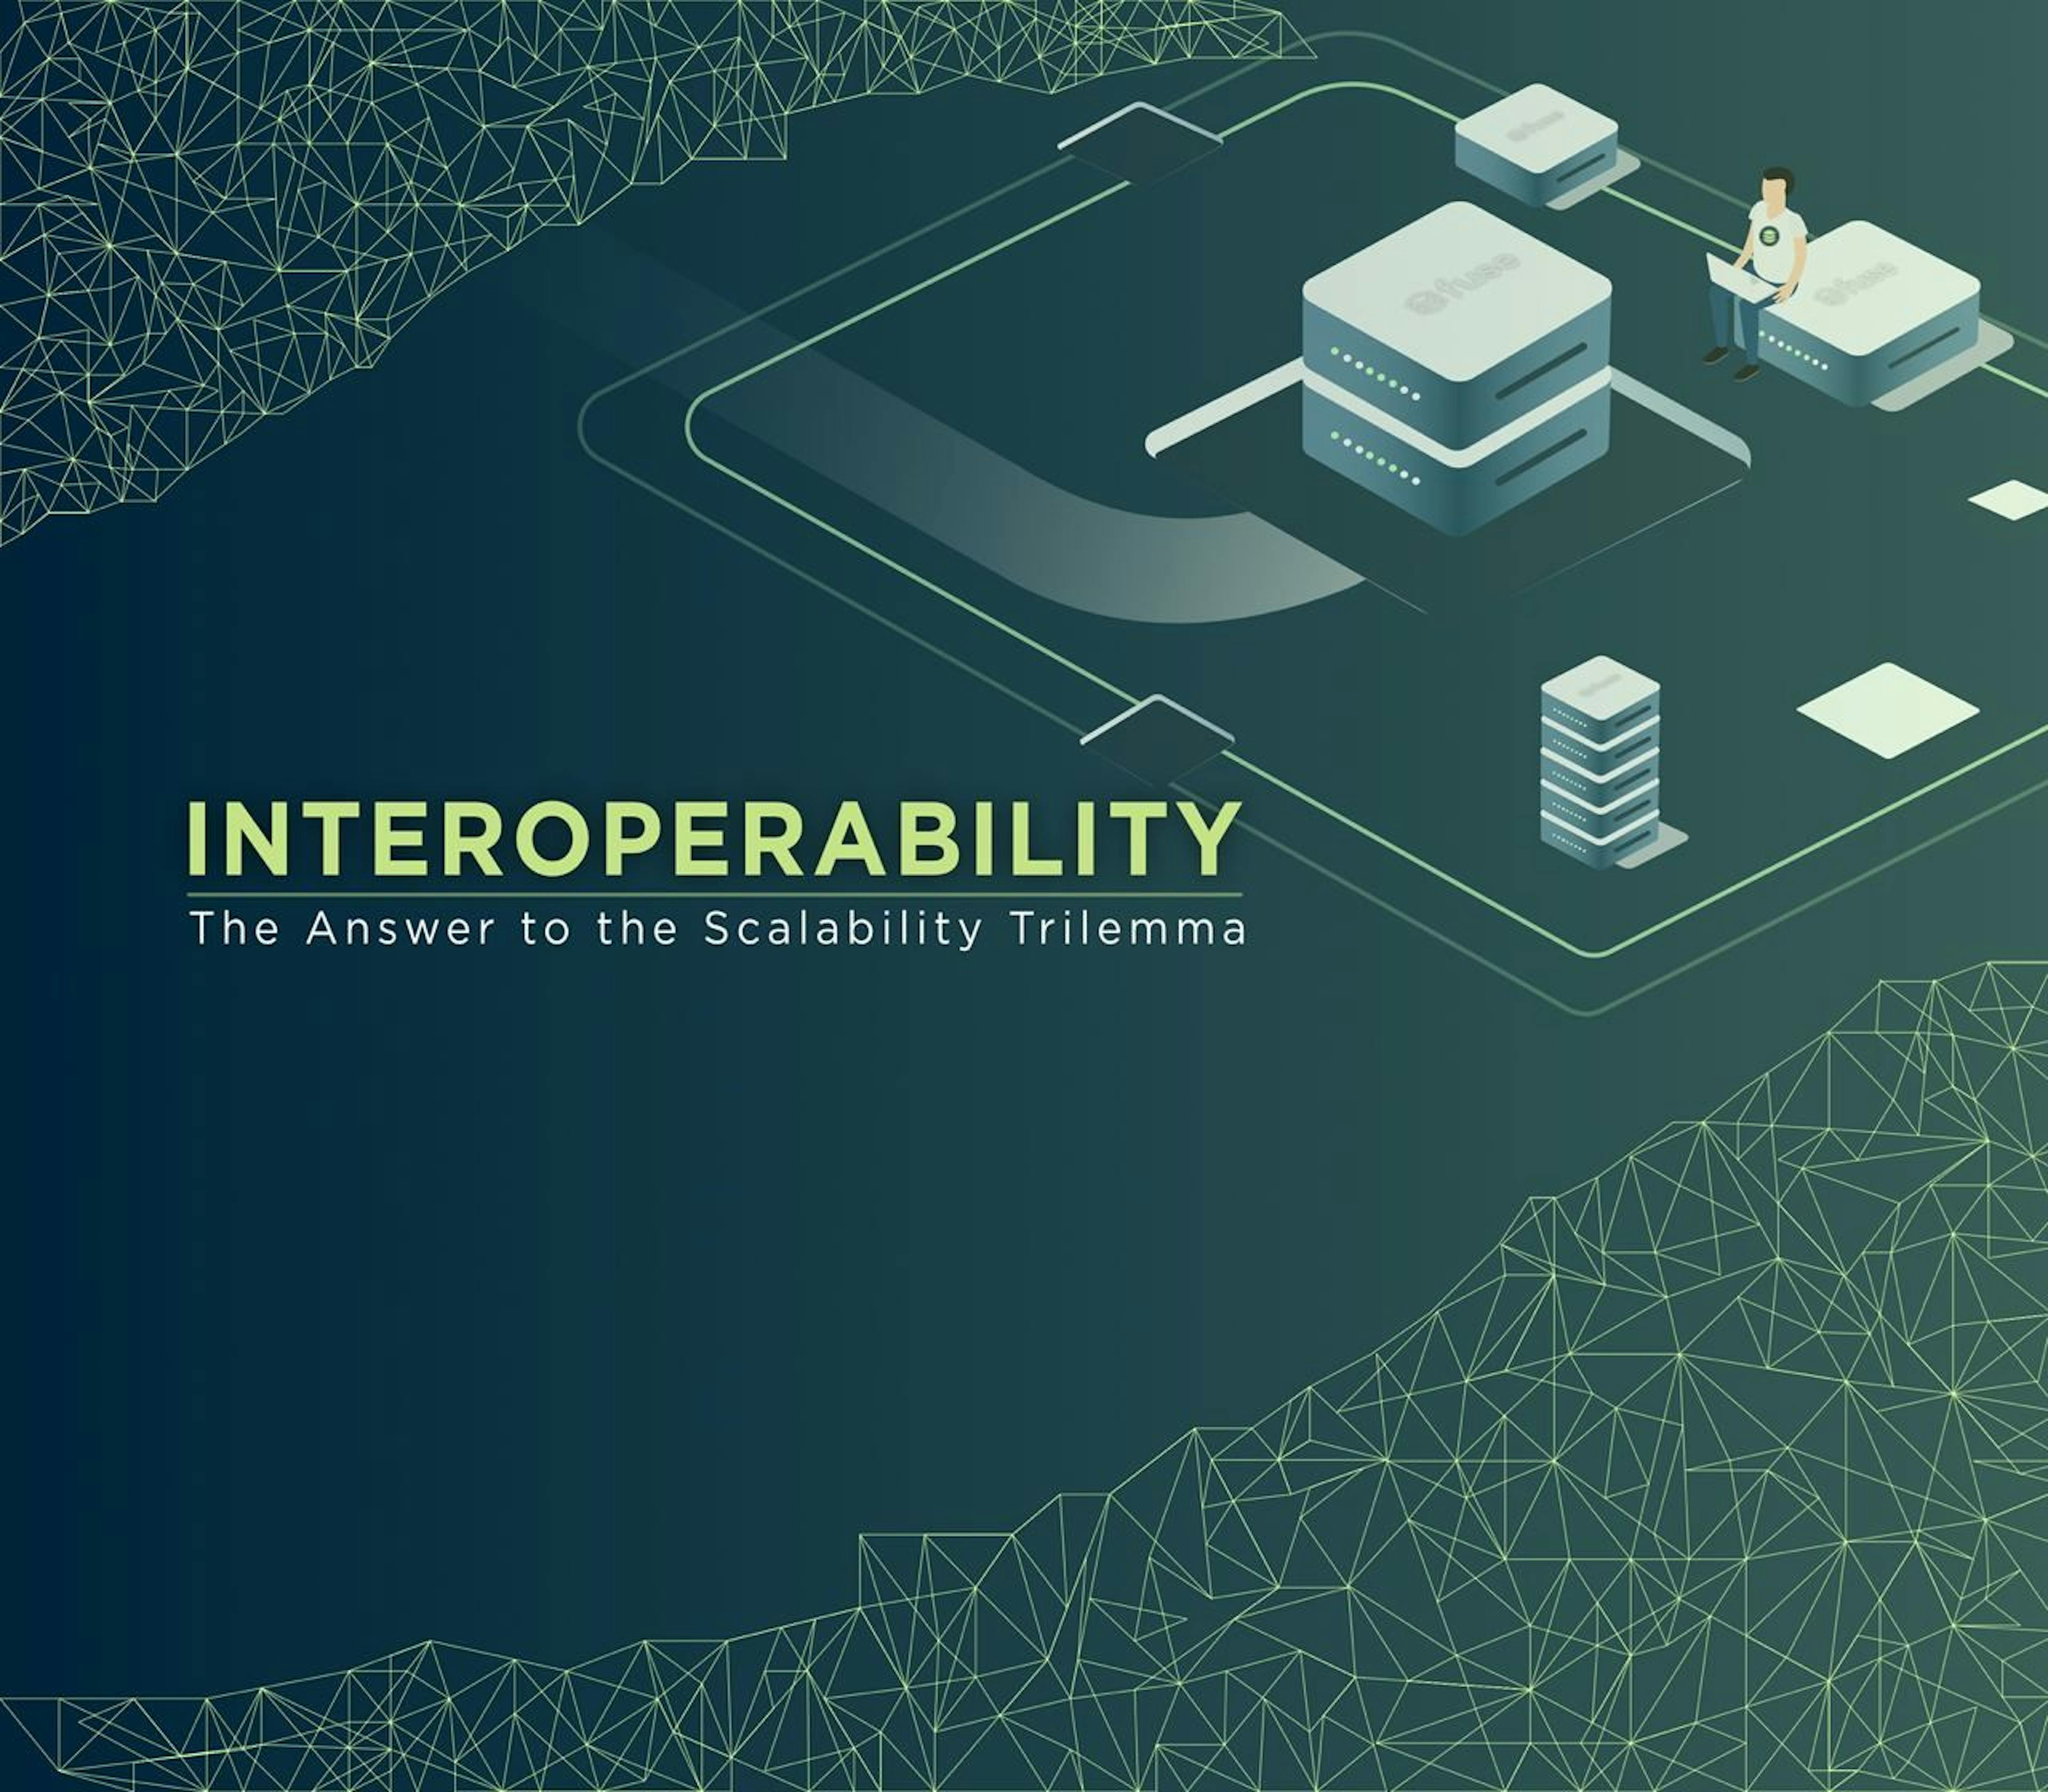 featured image - Interoperability: The Answer to the Scalability Trilemma